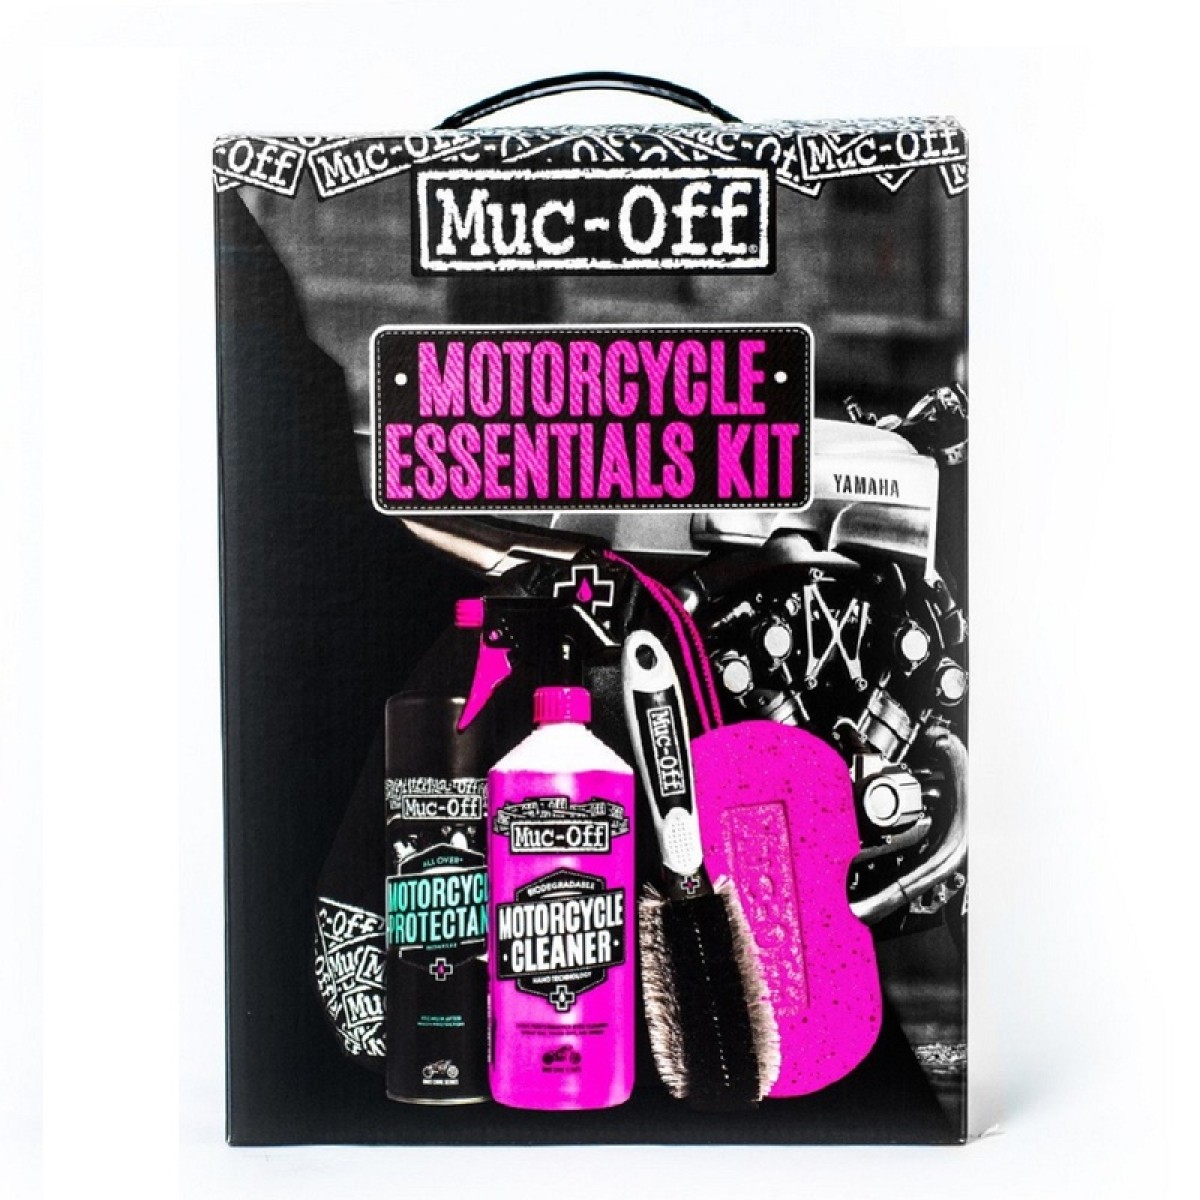 mucoff motorcycle care essentials kit